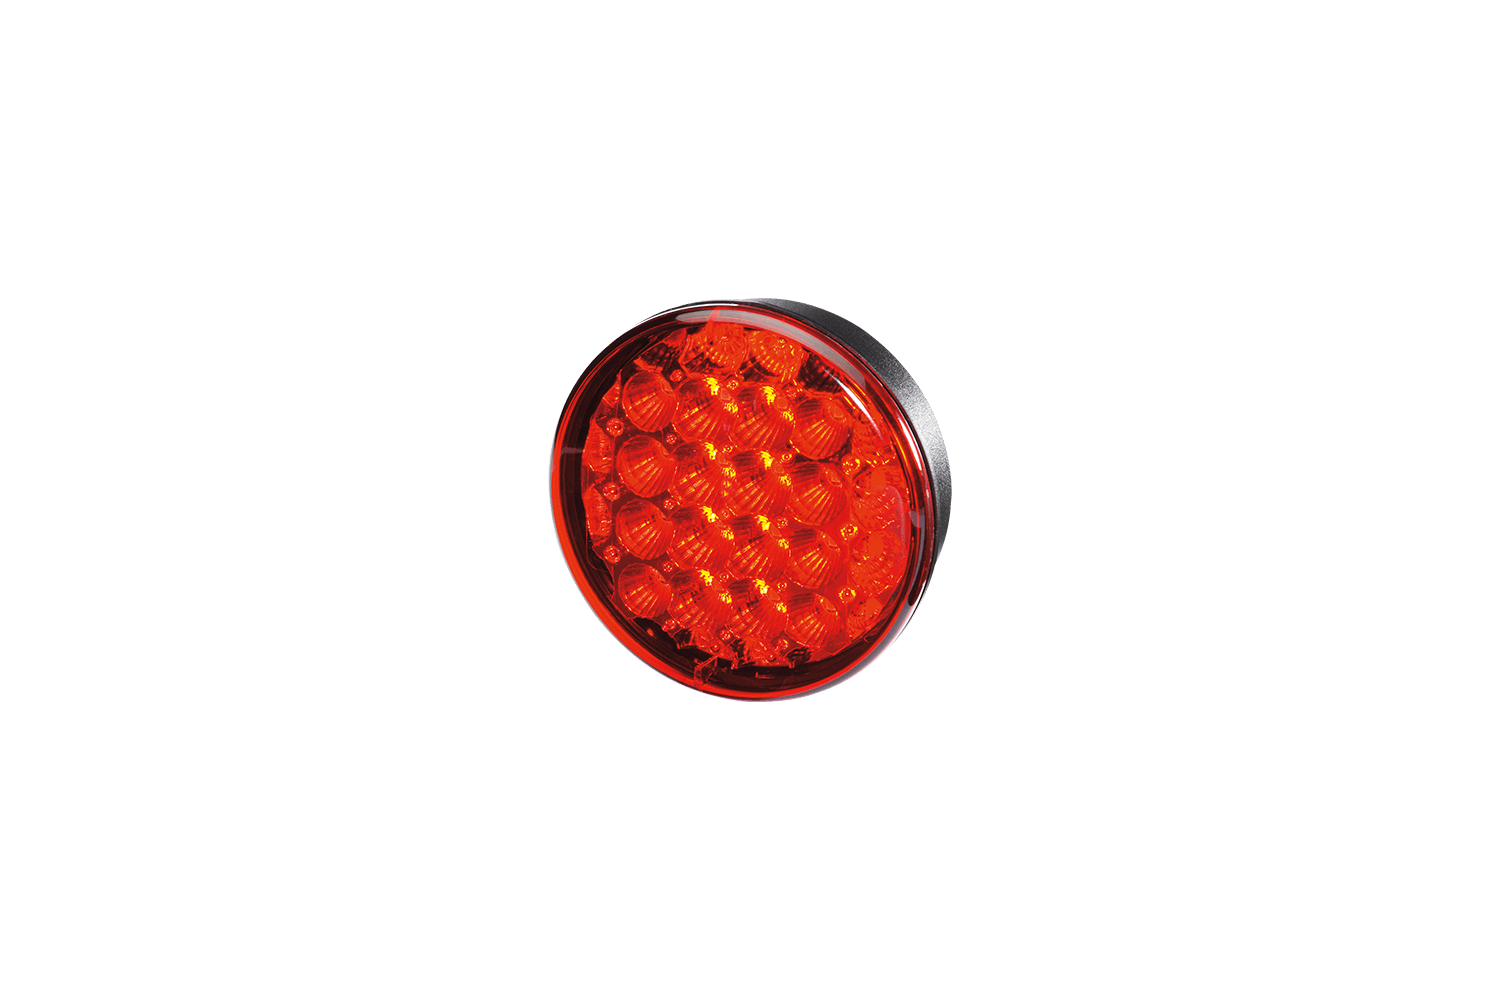 122 mm round LED rear lamp from Hella offered by Patlon